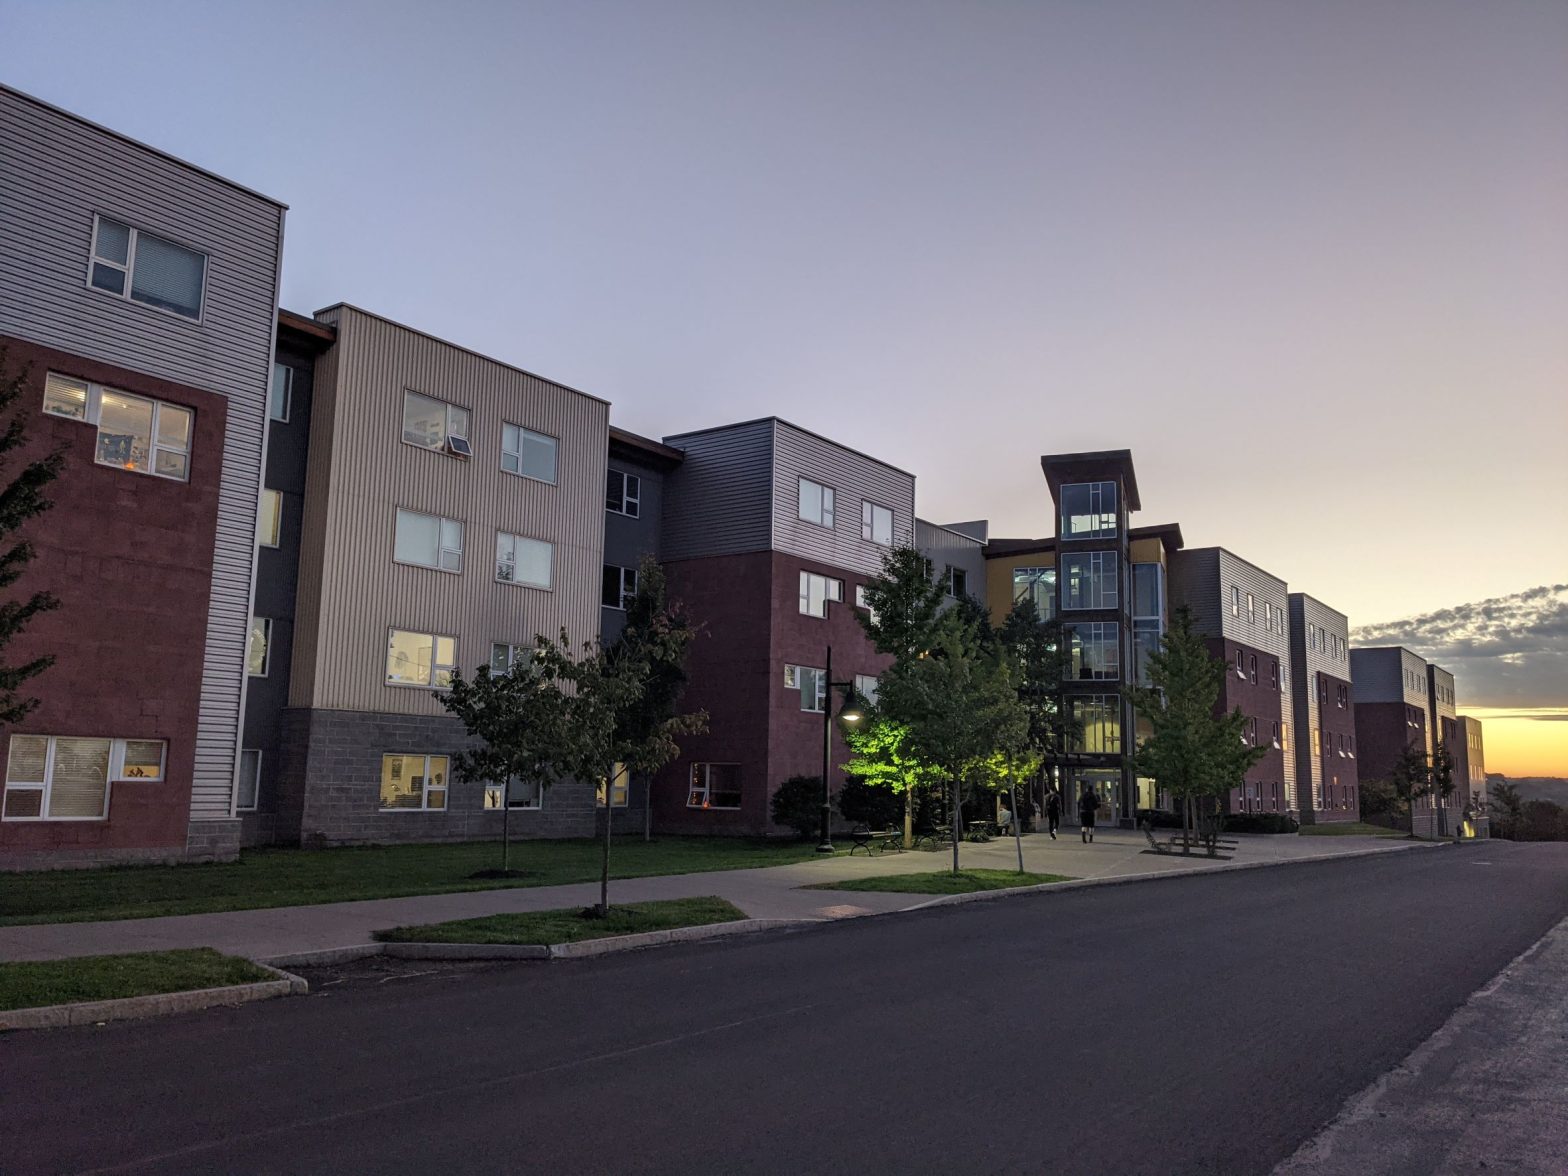 Long discontinues student housing building with large wooden ranger tower lit up at night with sunset in background, appears as a row of many rowhouses